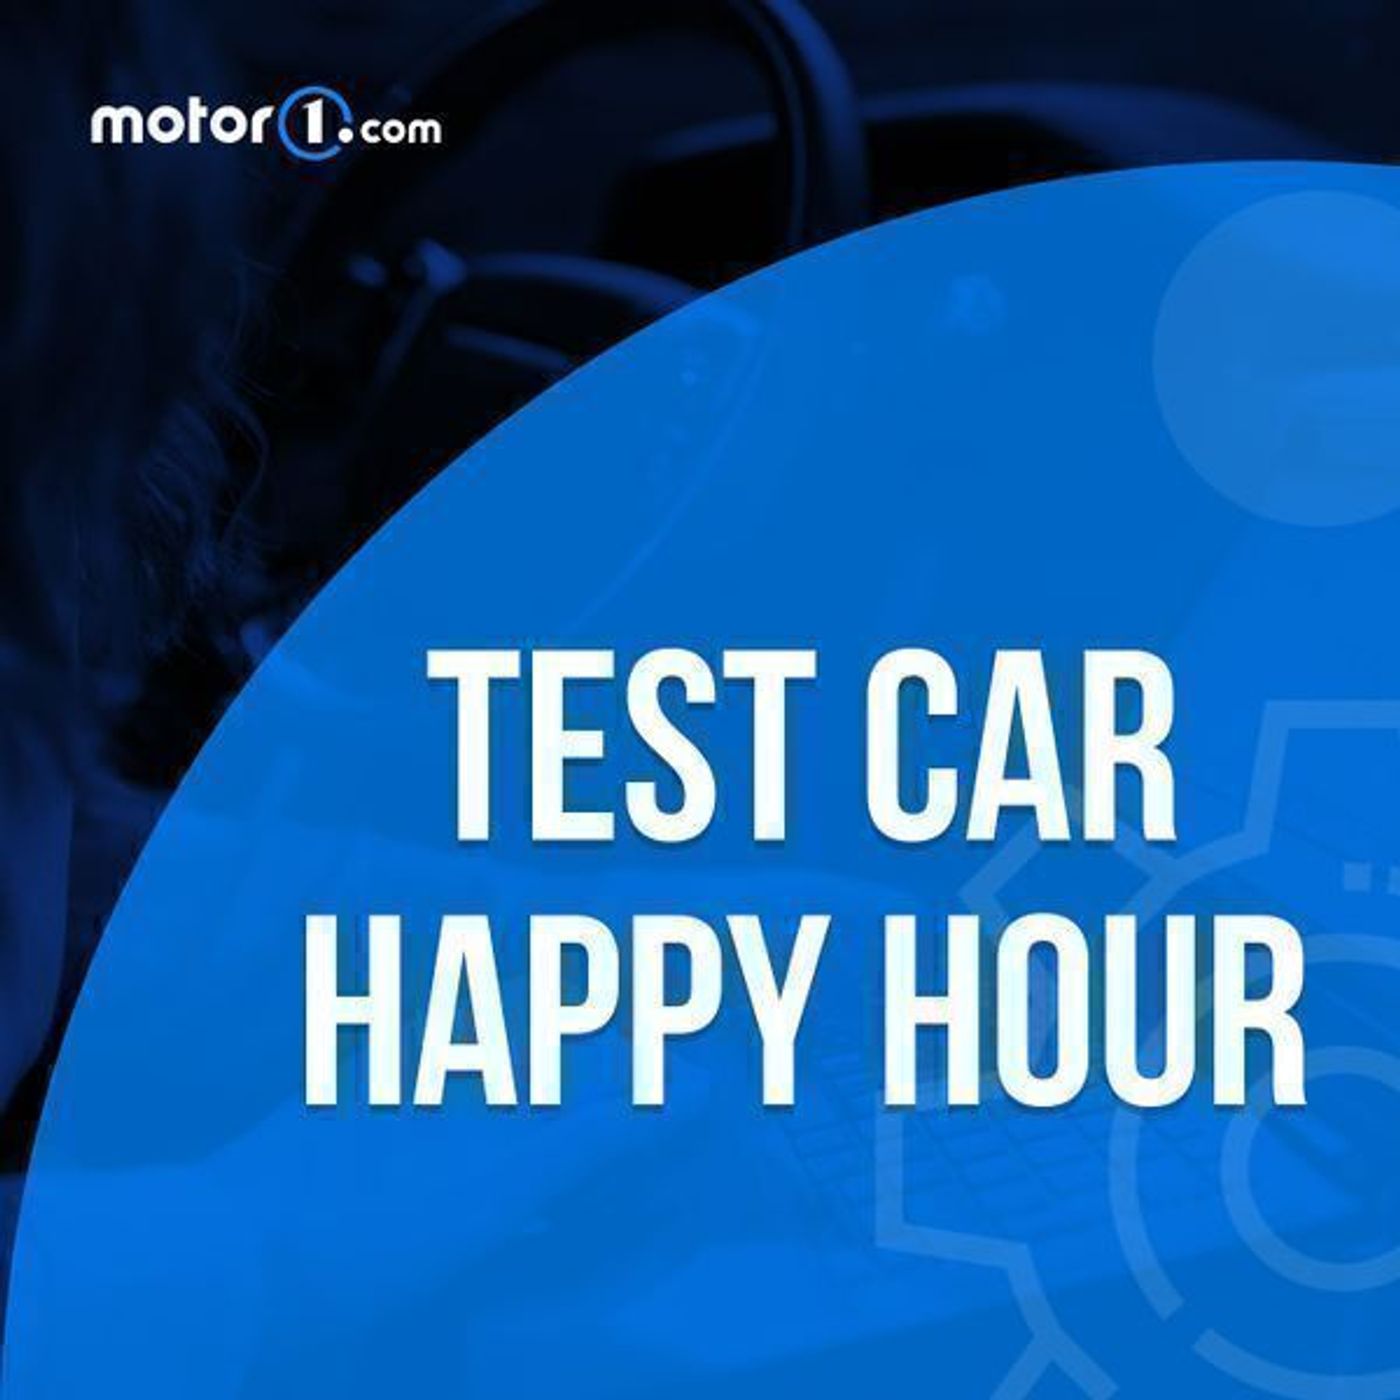 S1 Ep56: Motor1 Test Car Happy Hour #56: The Best and Worst Cars We’ve Driven This Year (So Far)